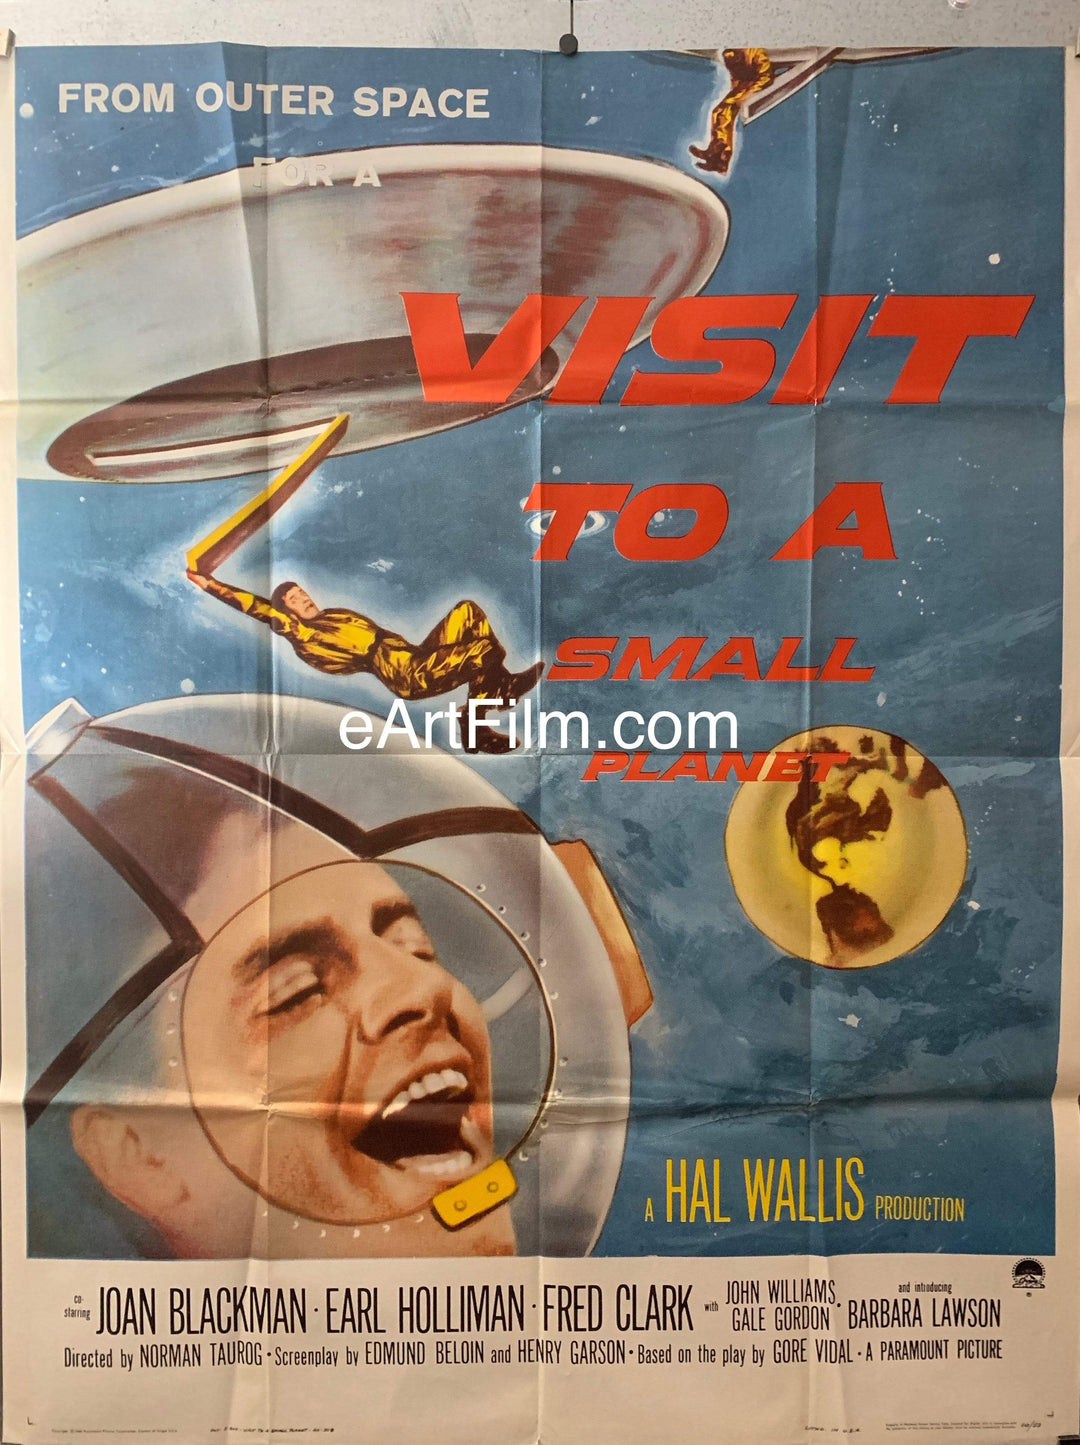 eArtFilm.com U.S 3 Sheet (41"x81") Visit To A Small Planet vintage movie poster 1960 41x81 Jerry Lewis comedy